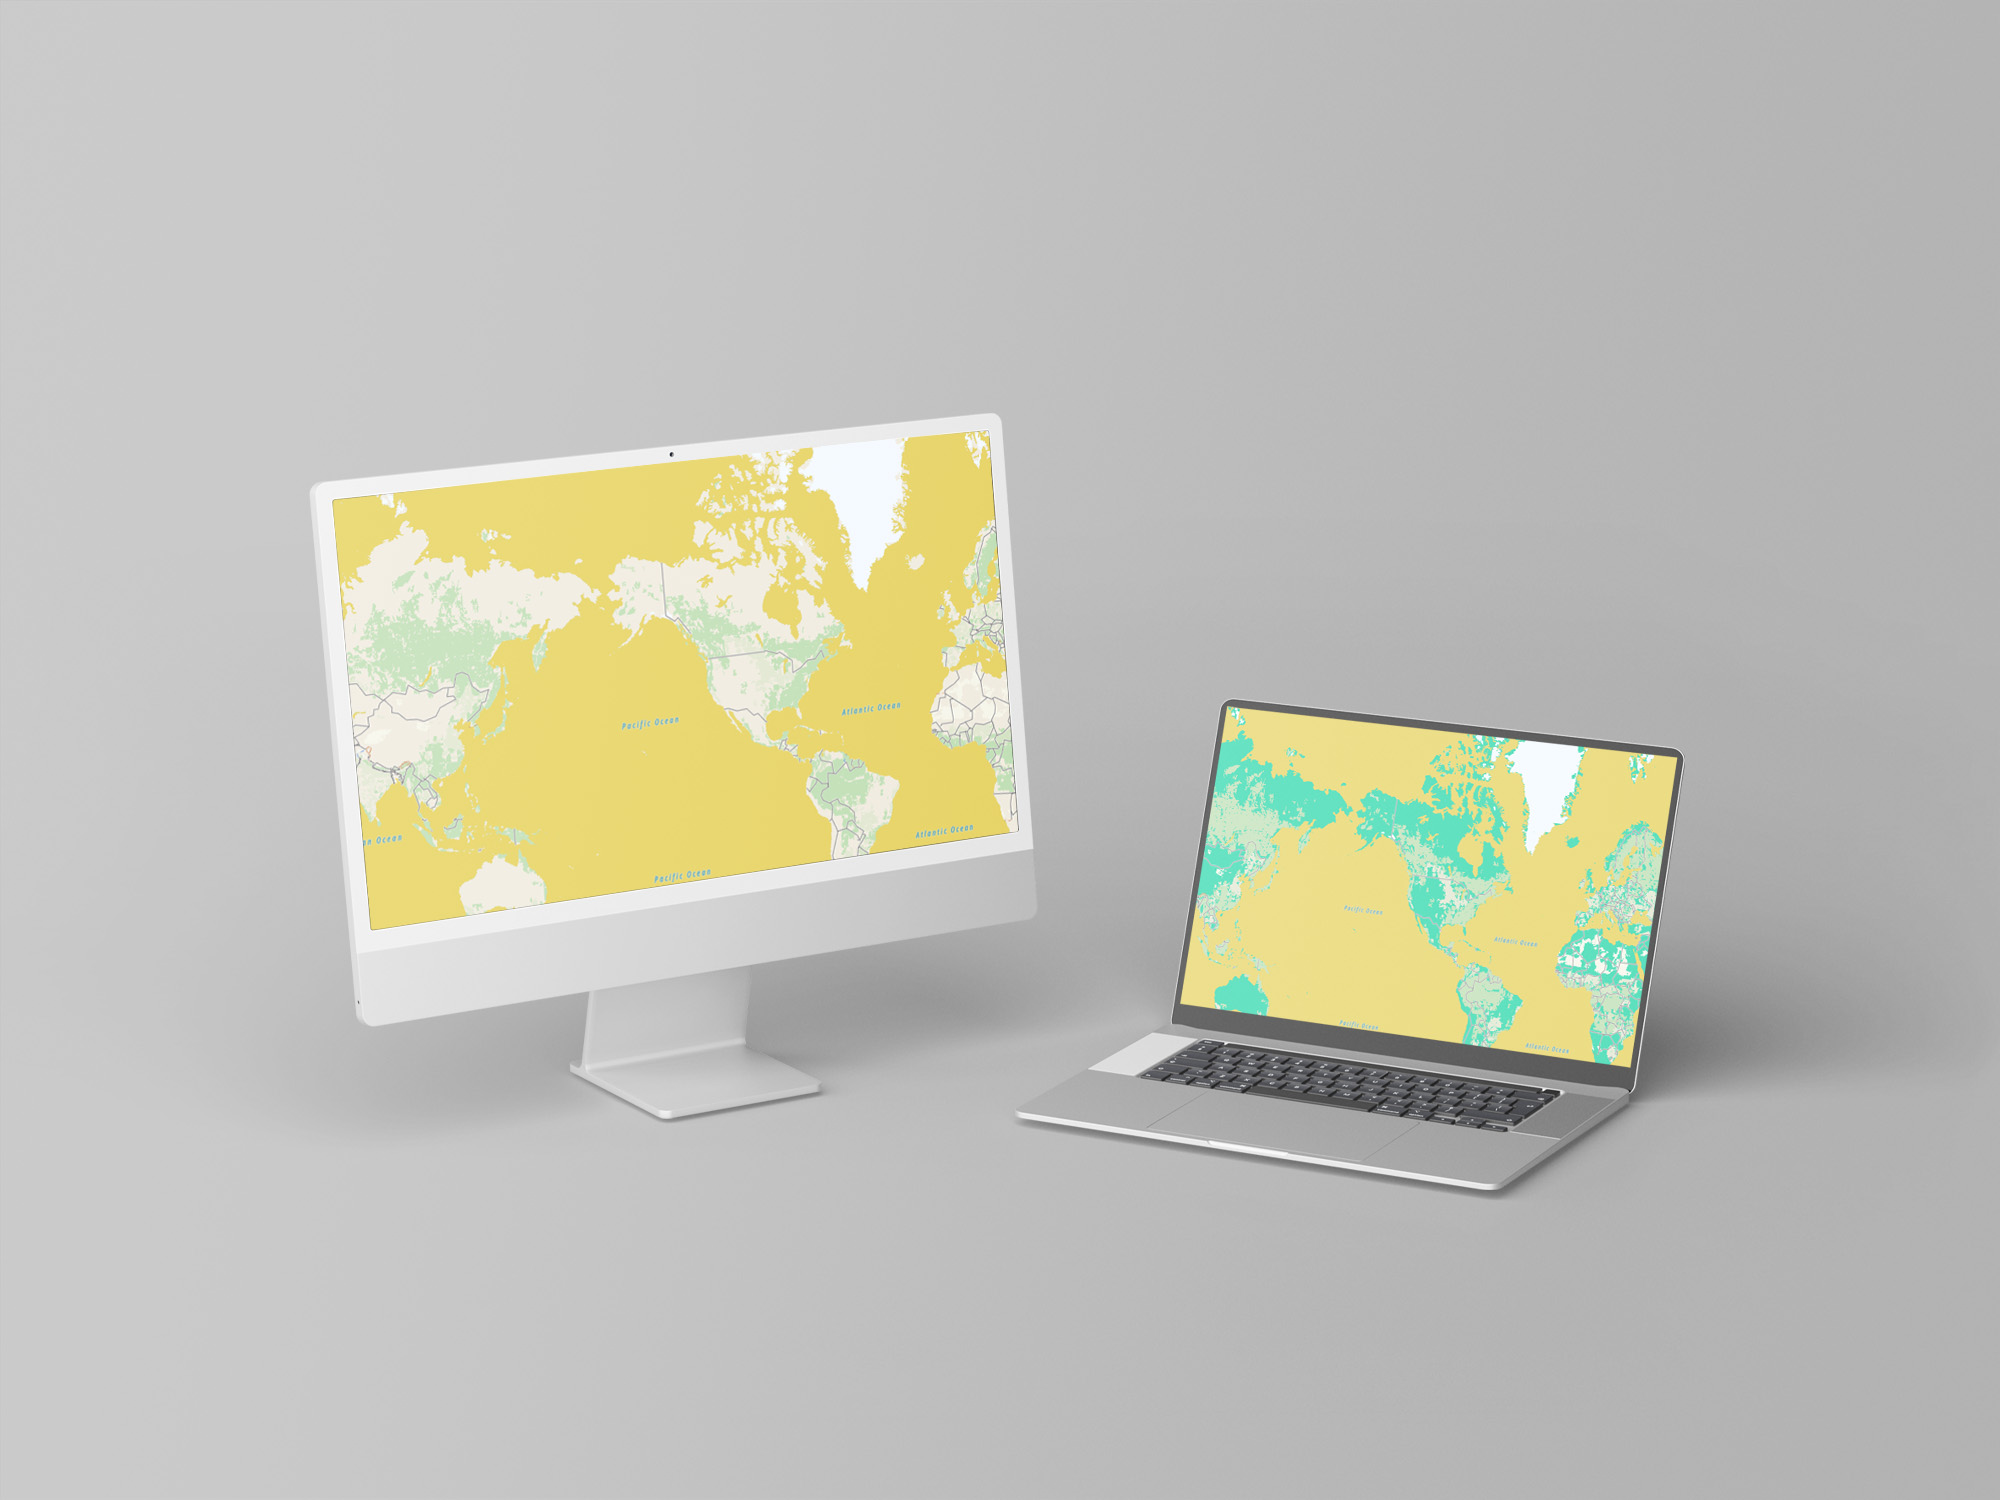 Create a Custom TomTom Map to Match Your Brand - Desktop and laptop displaying TomTom maps